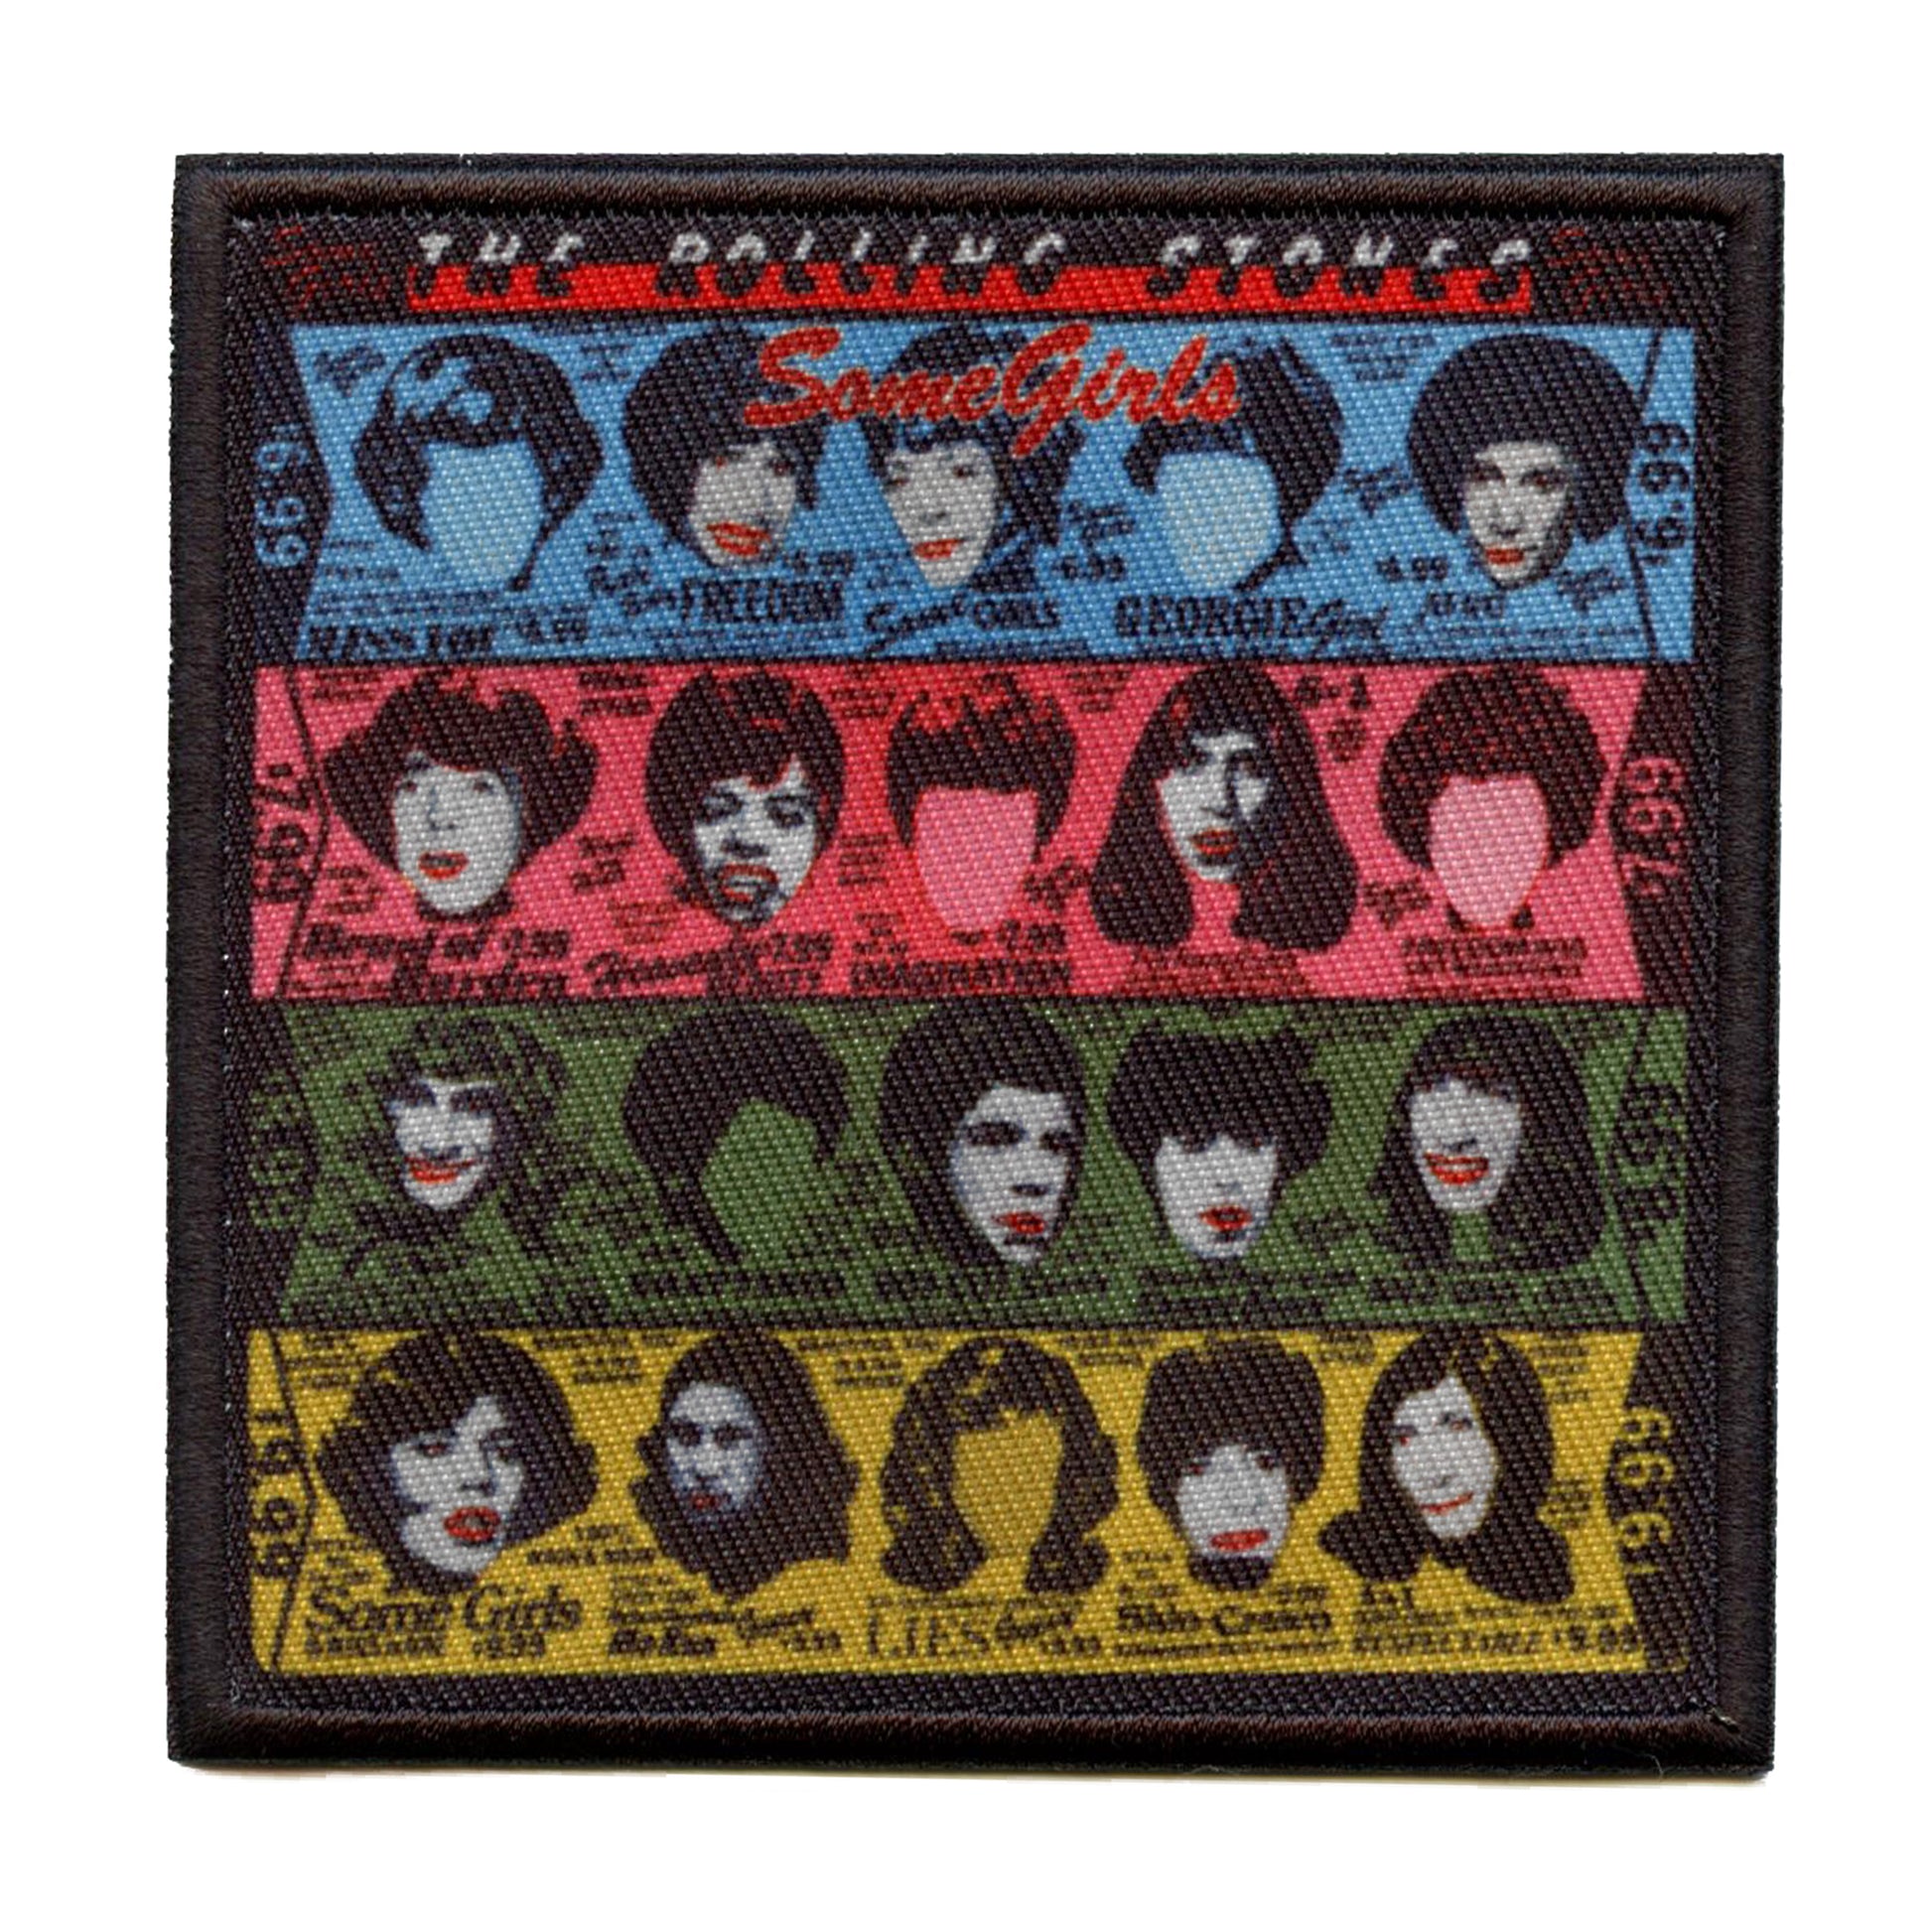 Some Girls Album Cover Patch Rolling Stones Classic Sublimated Iron On